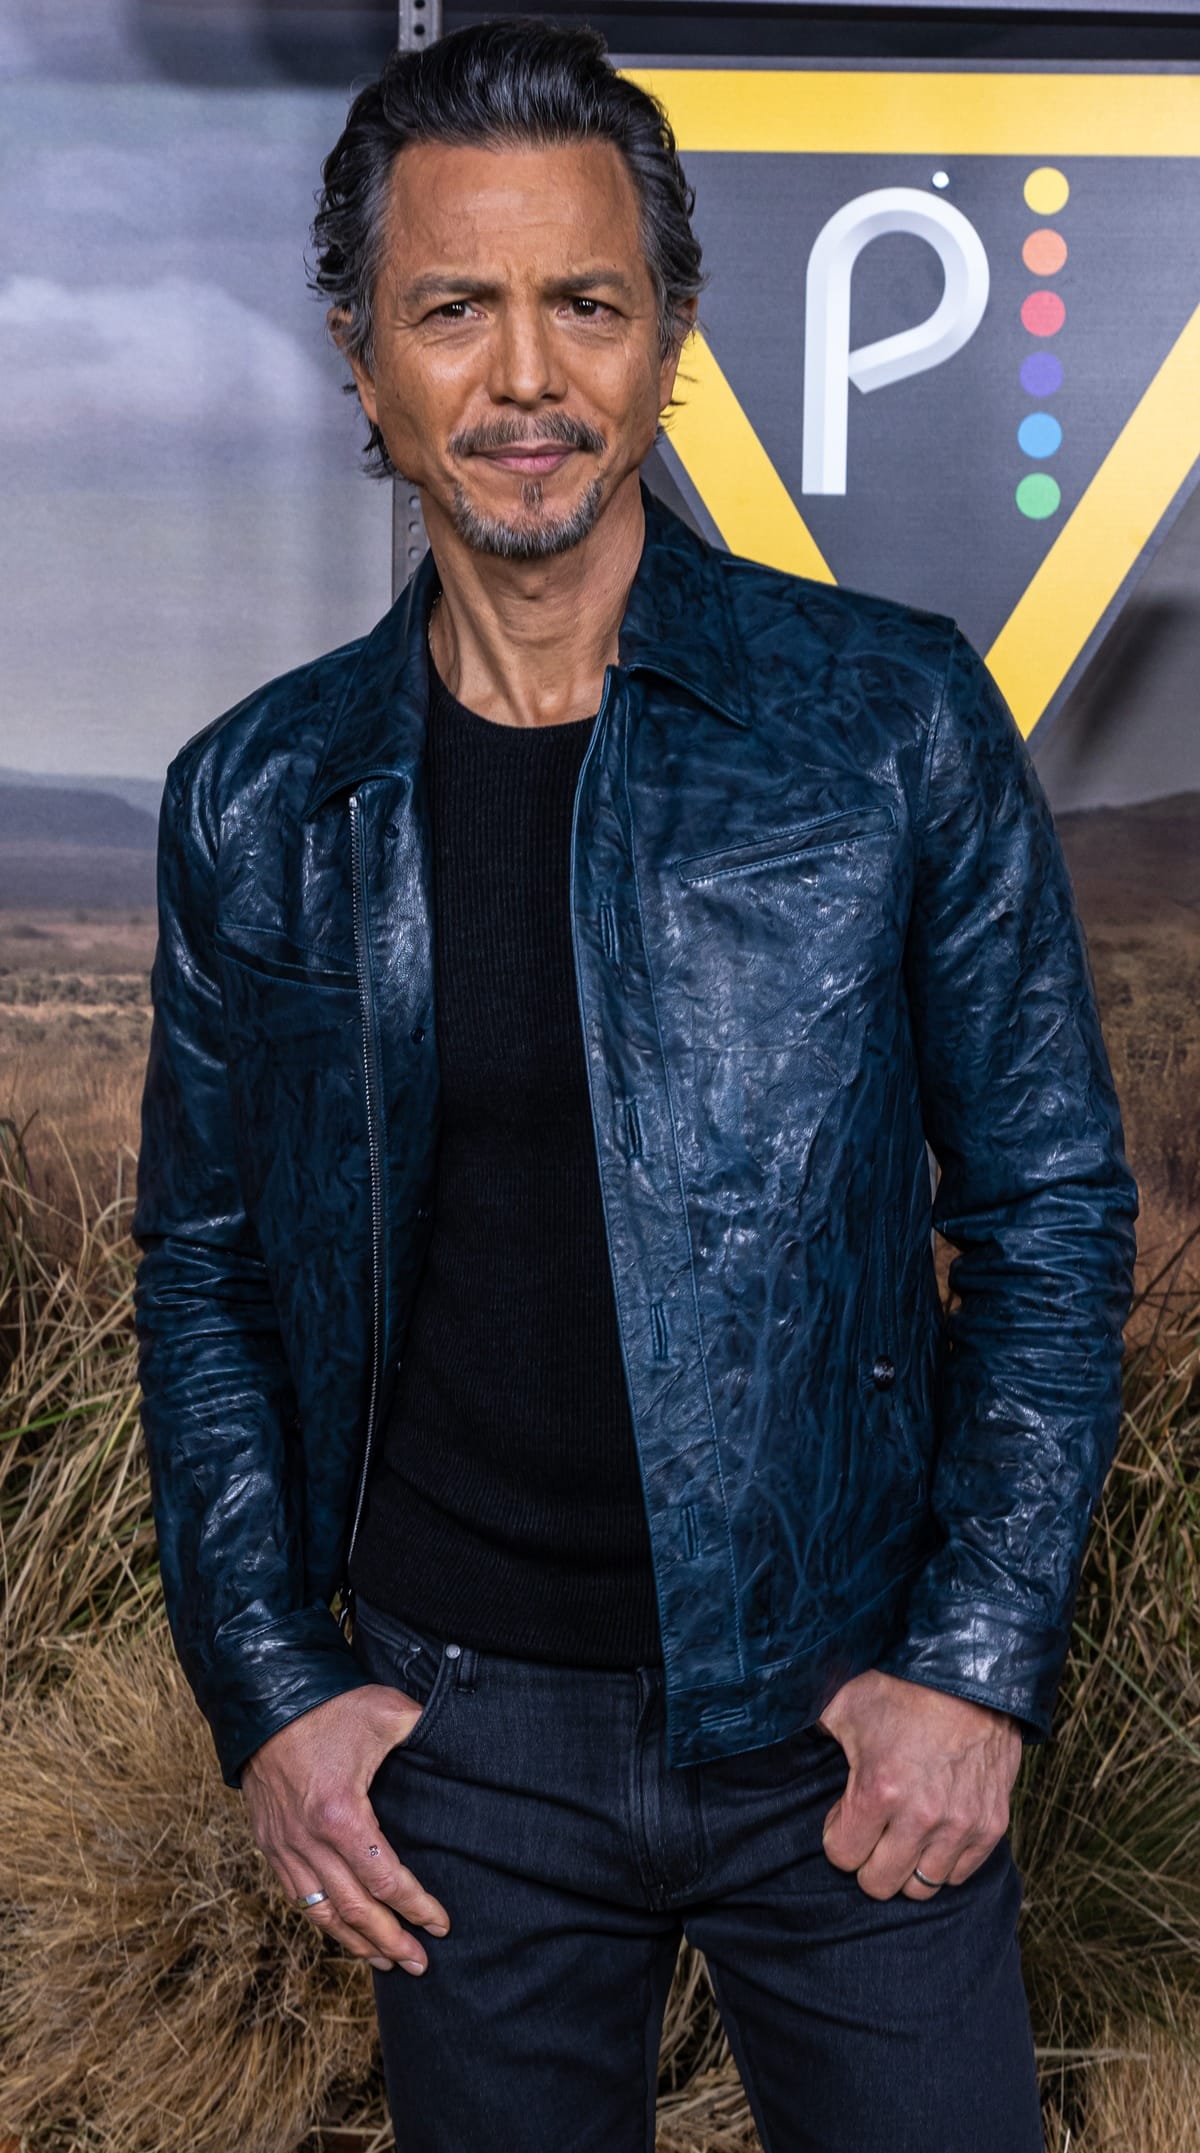 Benjamin Bratt is a talented American actor and producer known for his roles in films like "Demolition Man," "Law & Order," and "Despicable Me 2," as well as TV series like "Private Practice" and "Star"